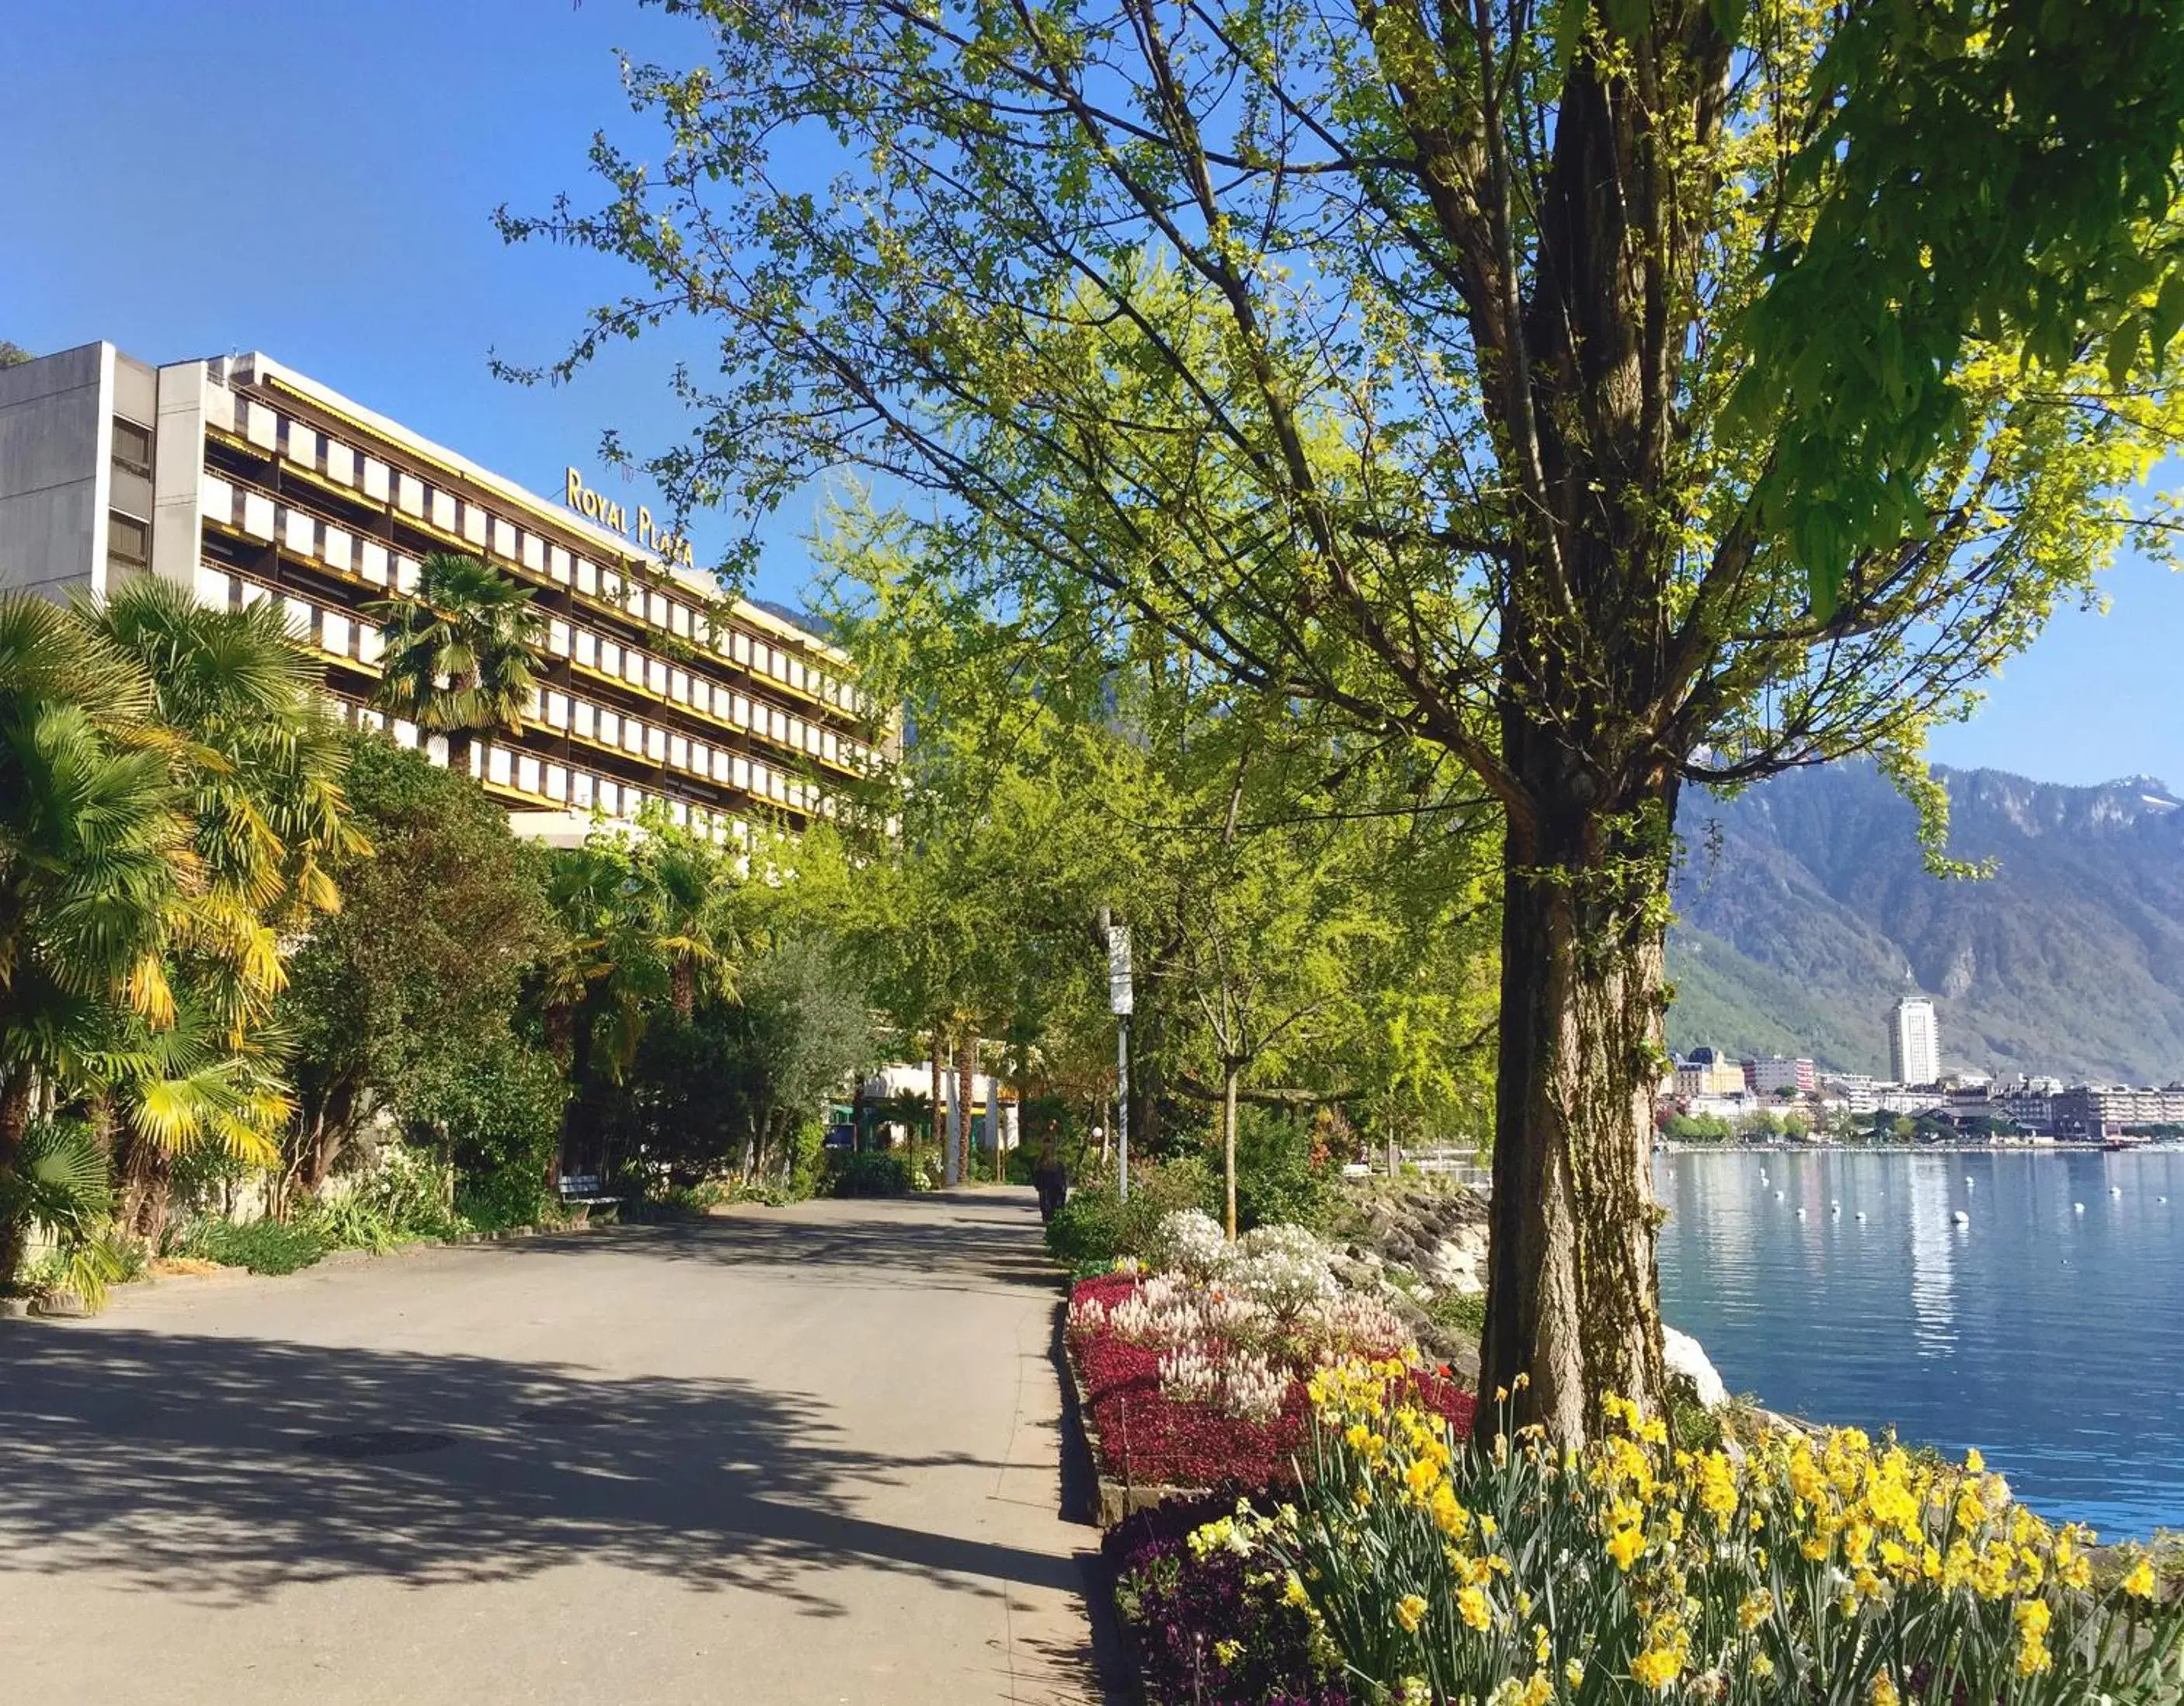 Property building in Royal Plaza Montreux